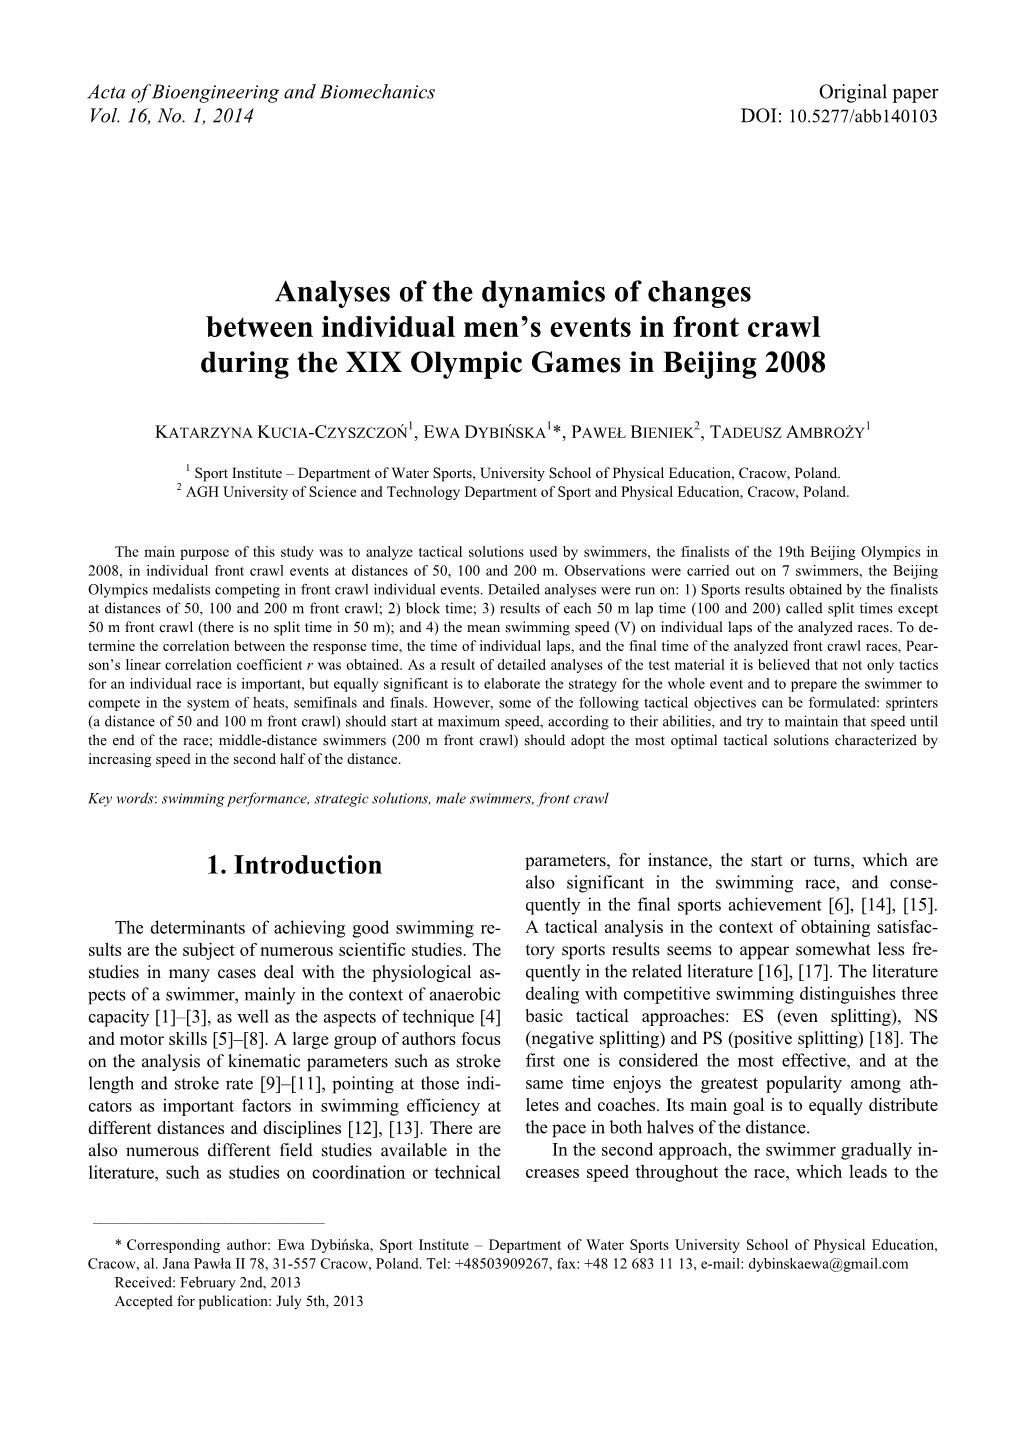 Analyses of the Dynamics of Changes Between Individual Men's Events in Front Crawl During the XIX Olympic Games in Beijing